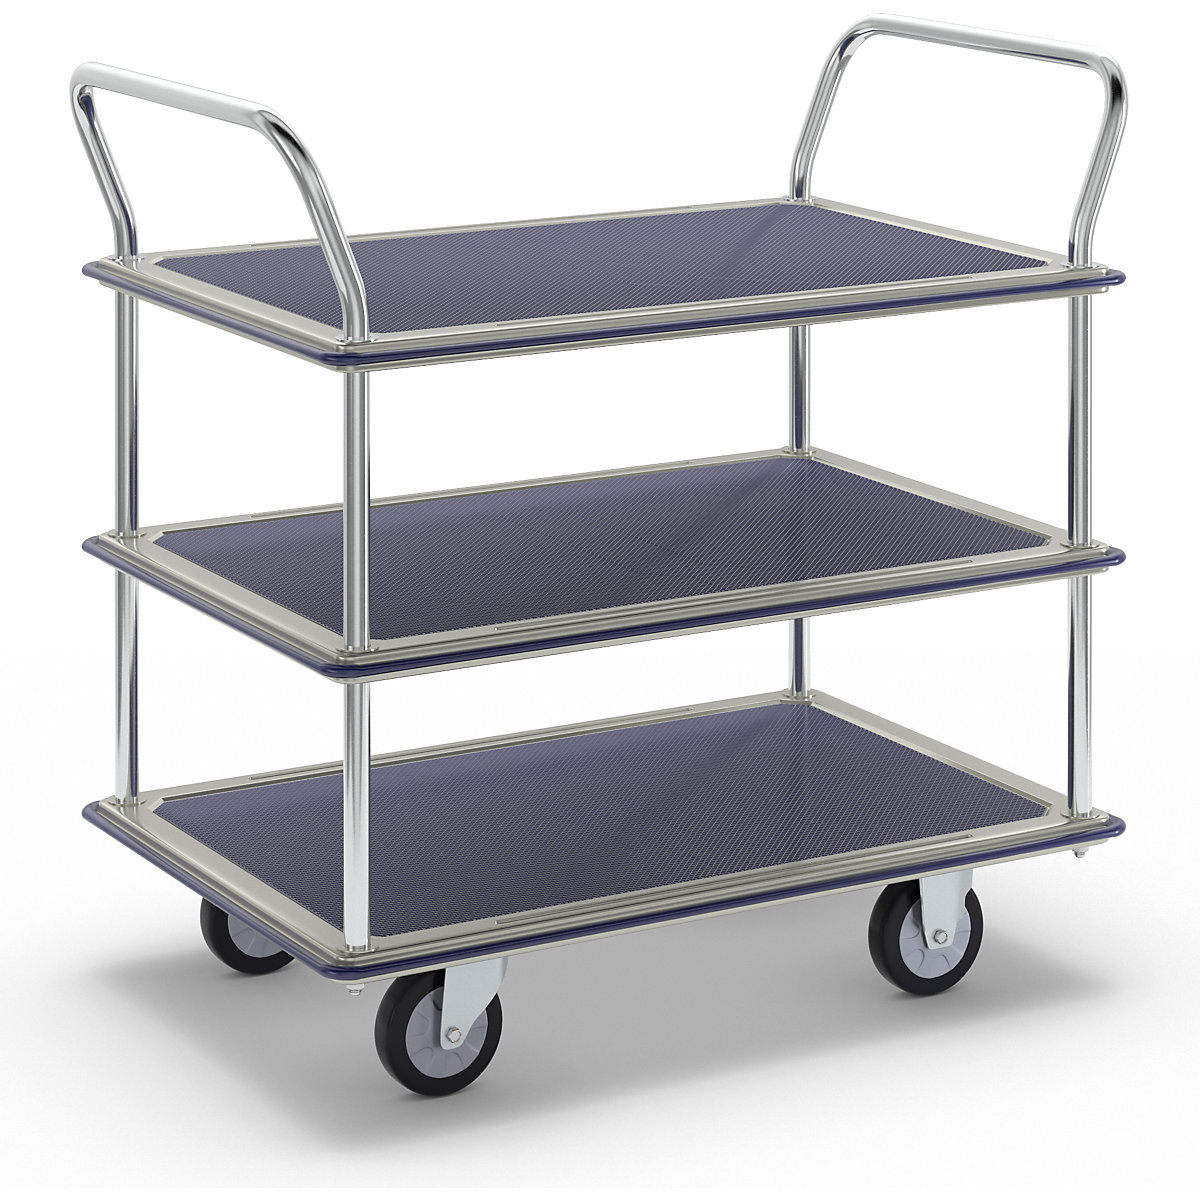 Table trolley chrome plated, 3 shelves with non-slip covering, 2 push handles, max. load 250 kg-1